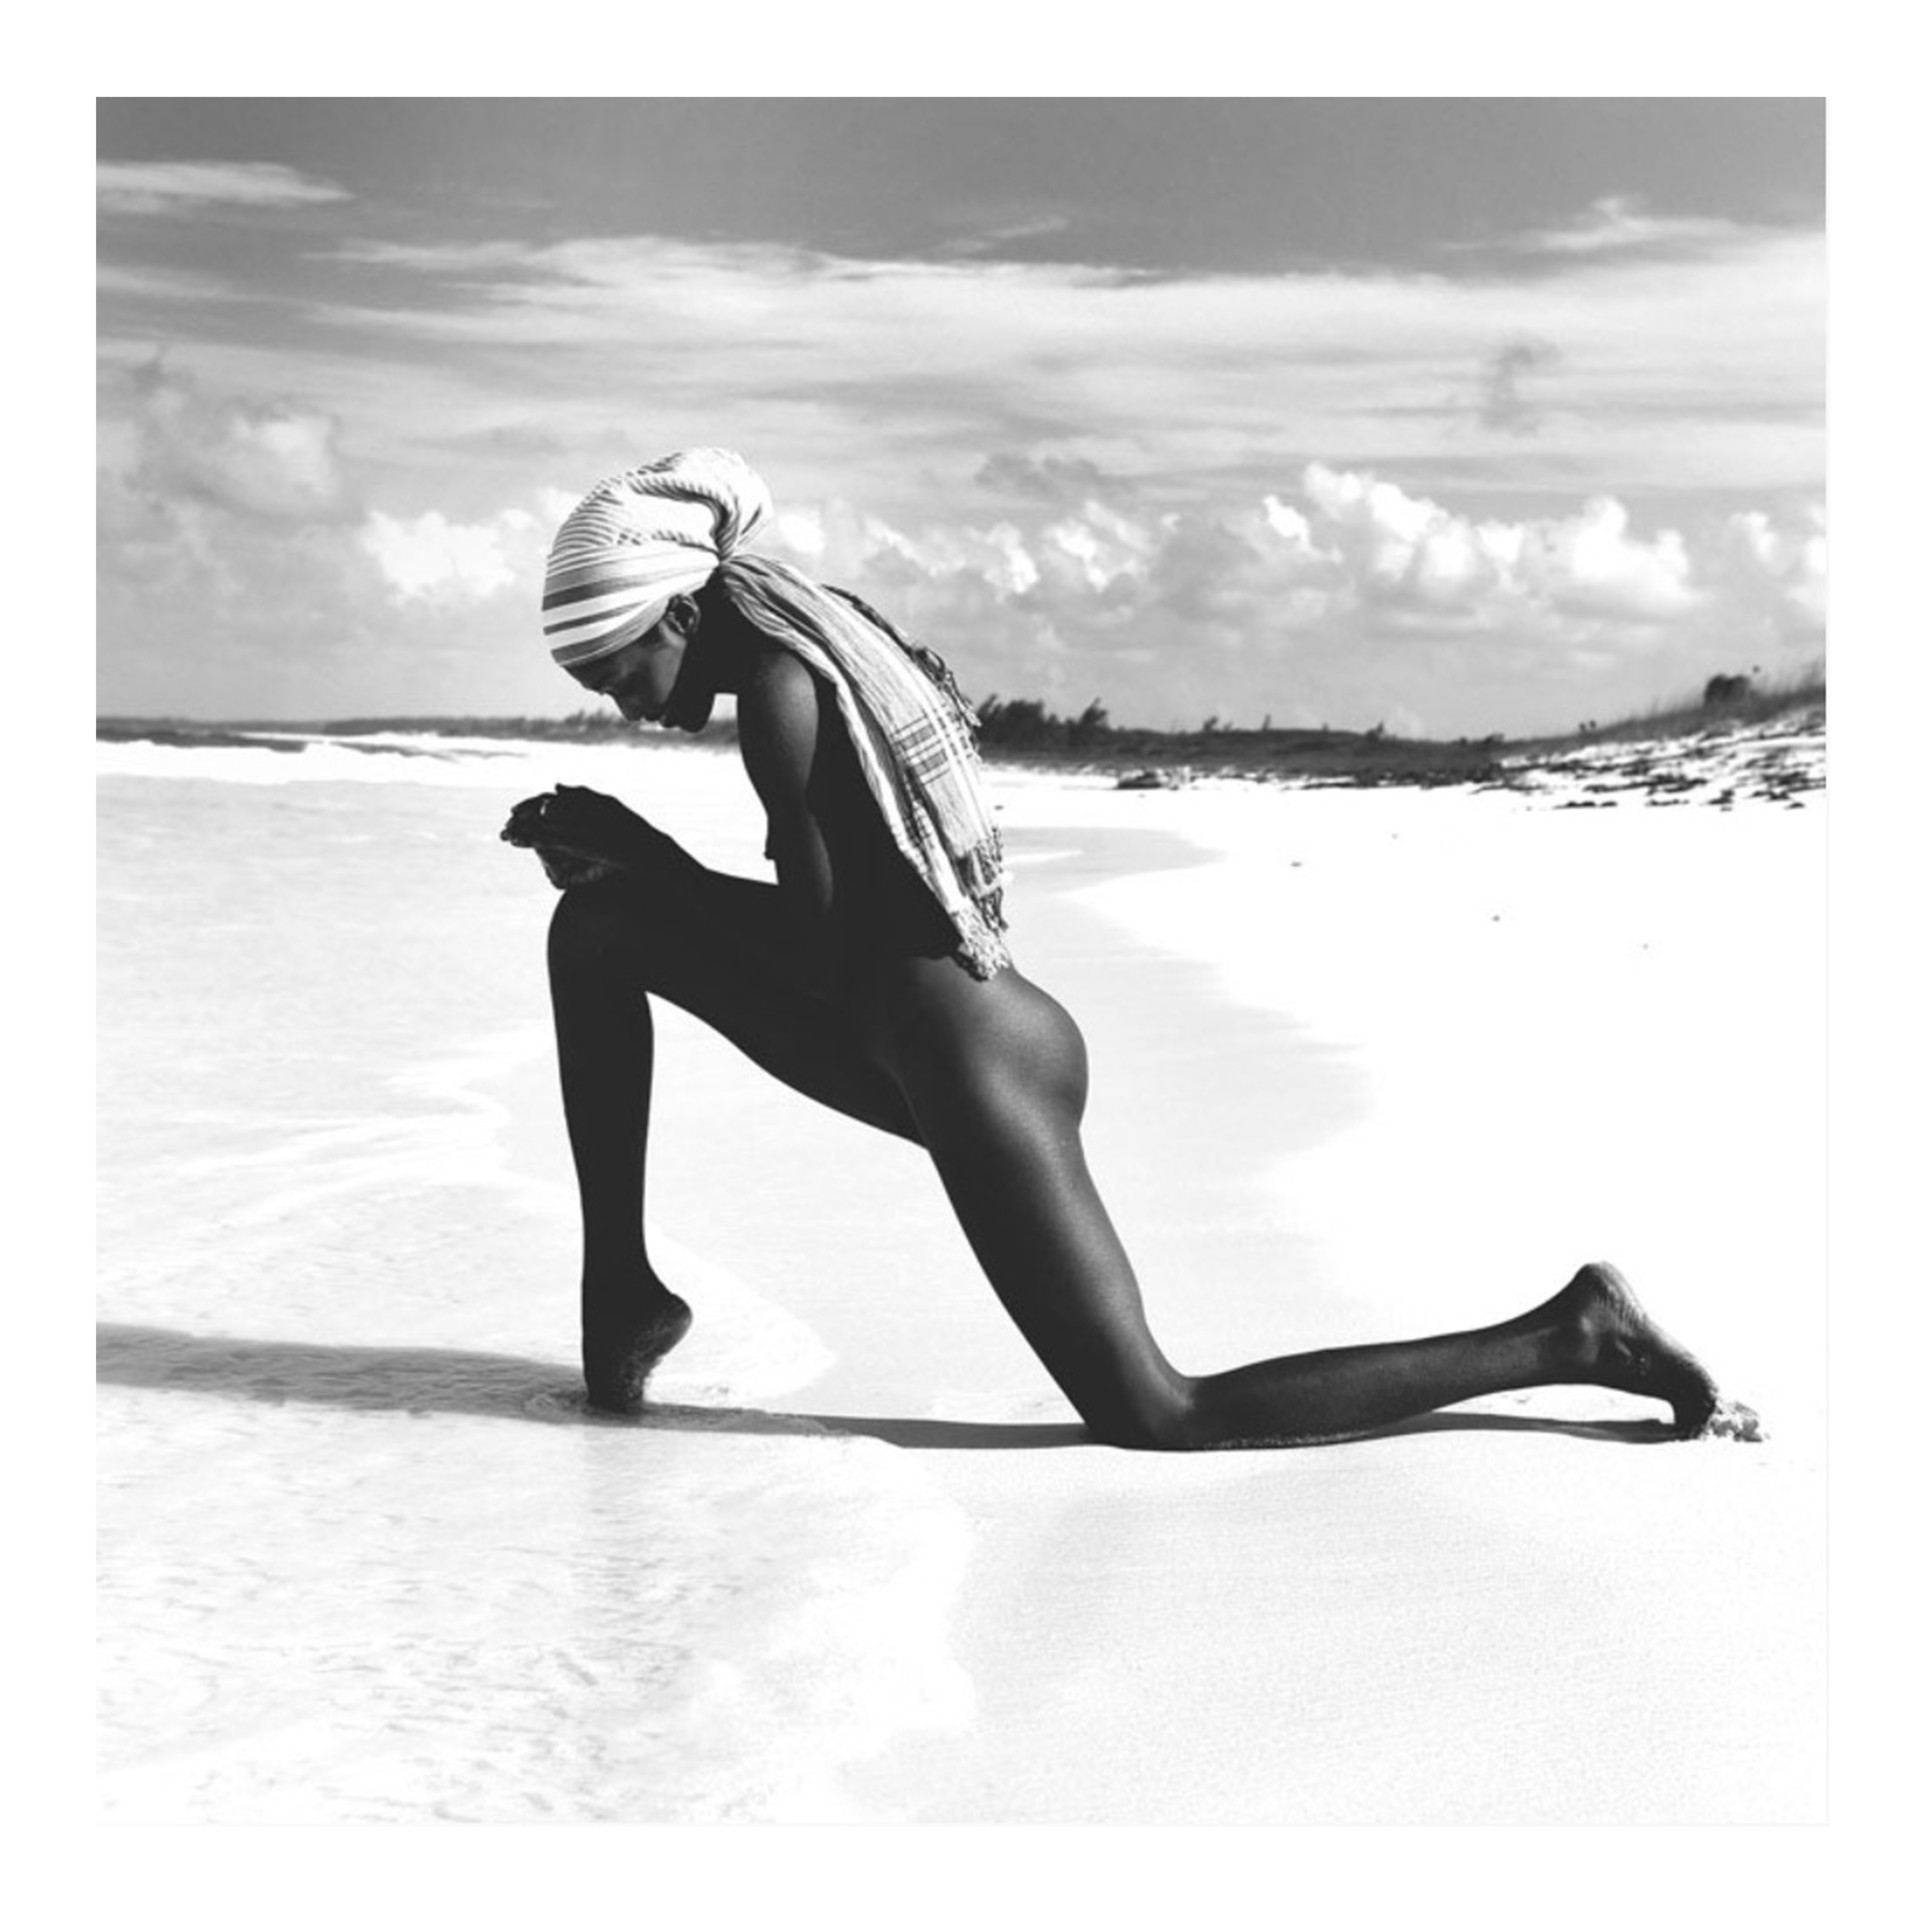 Wilmide Yoga (Bahamas) by Jean-Philippe Piter